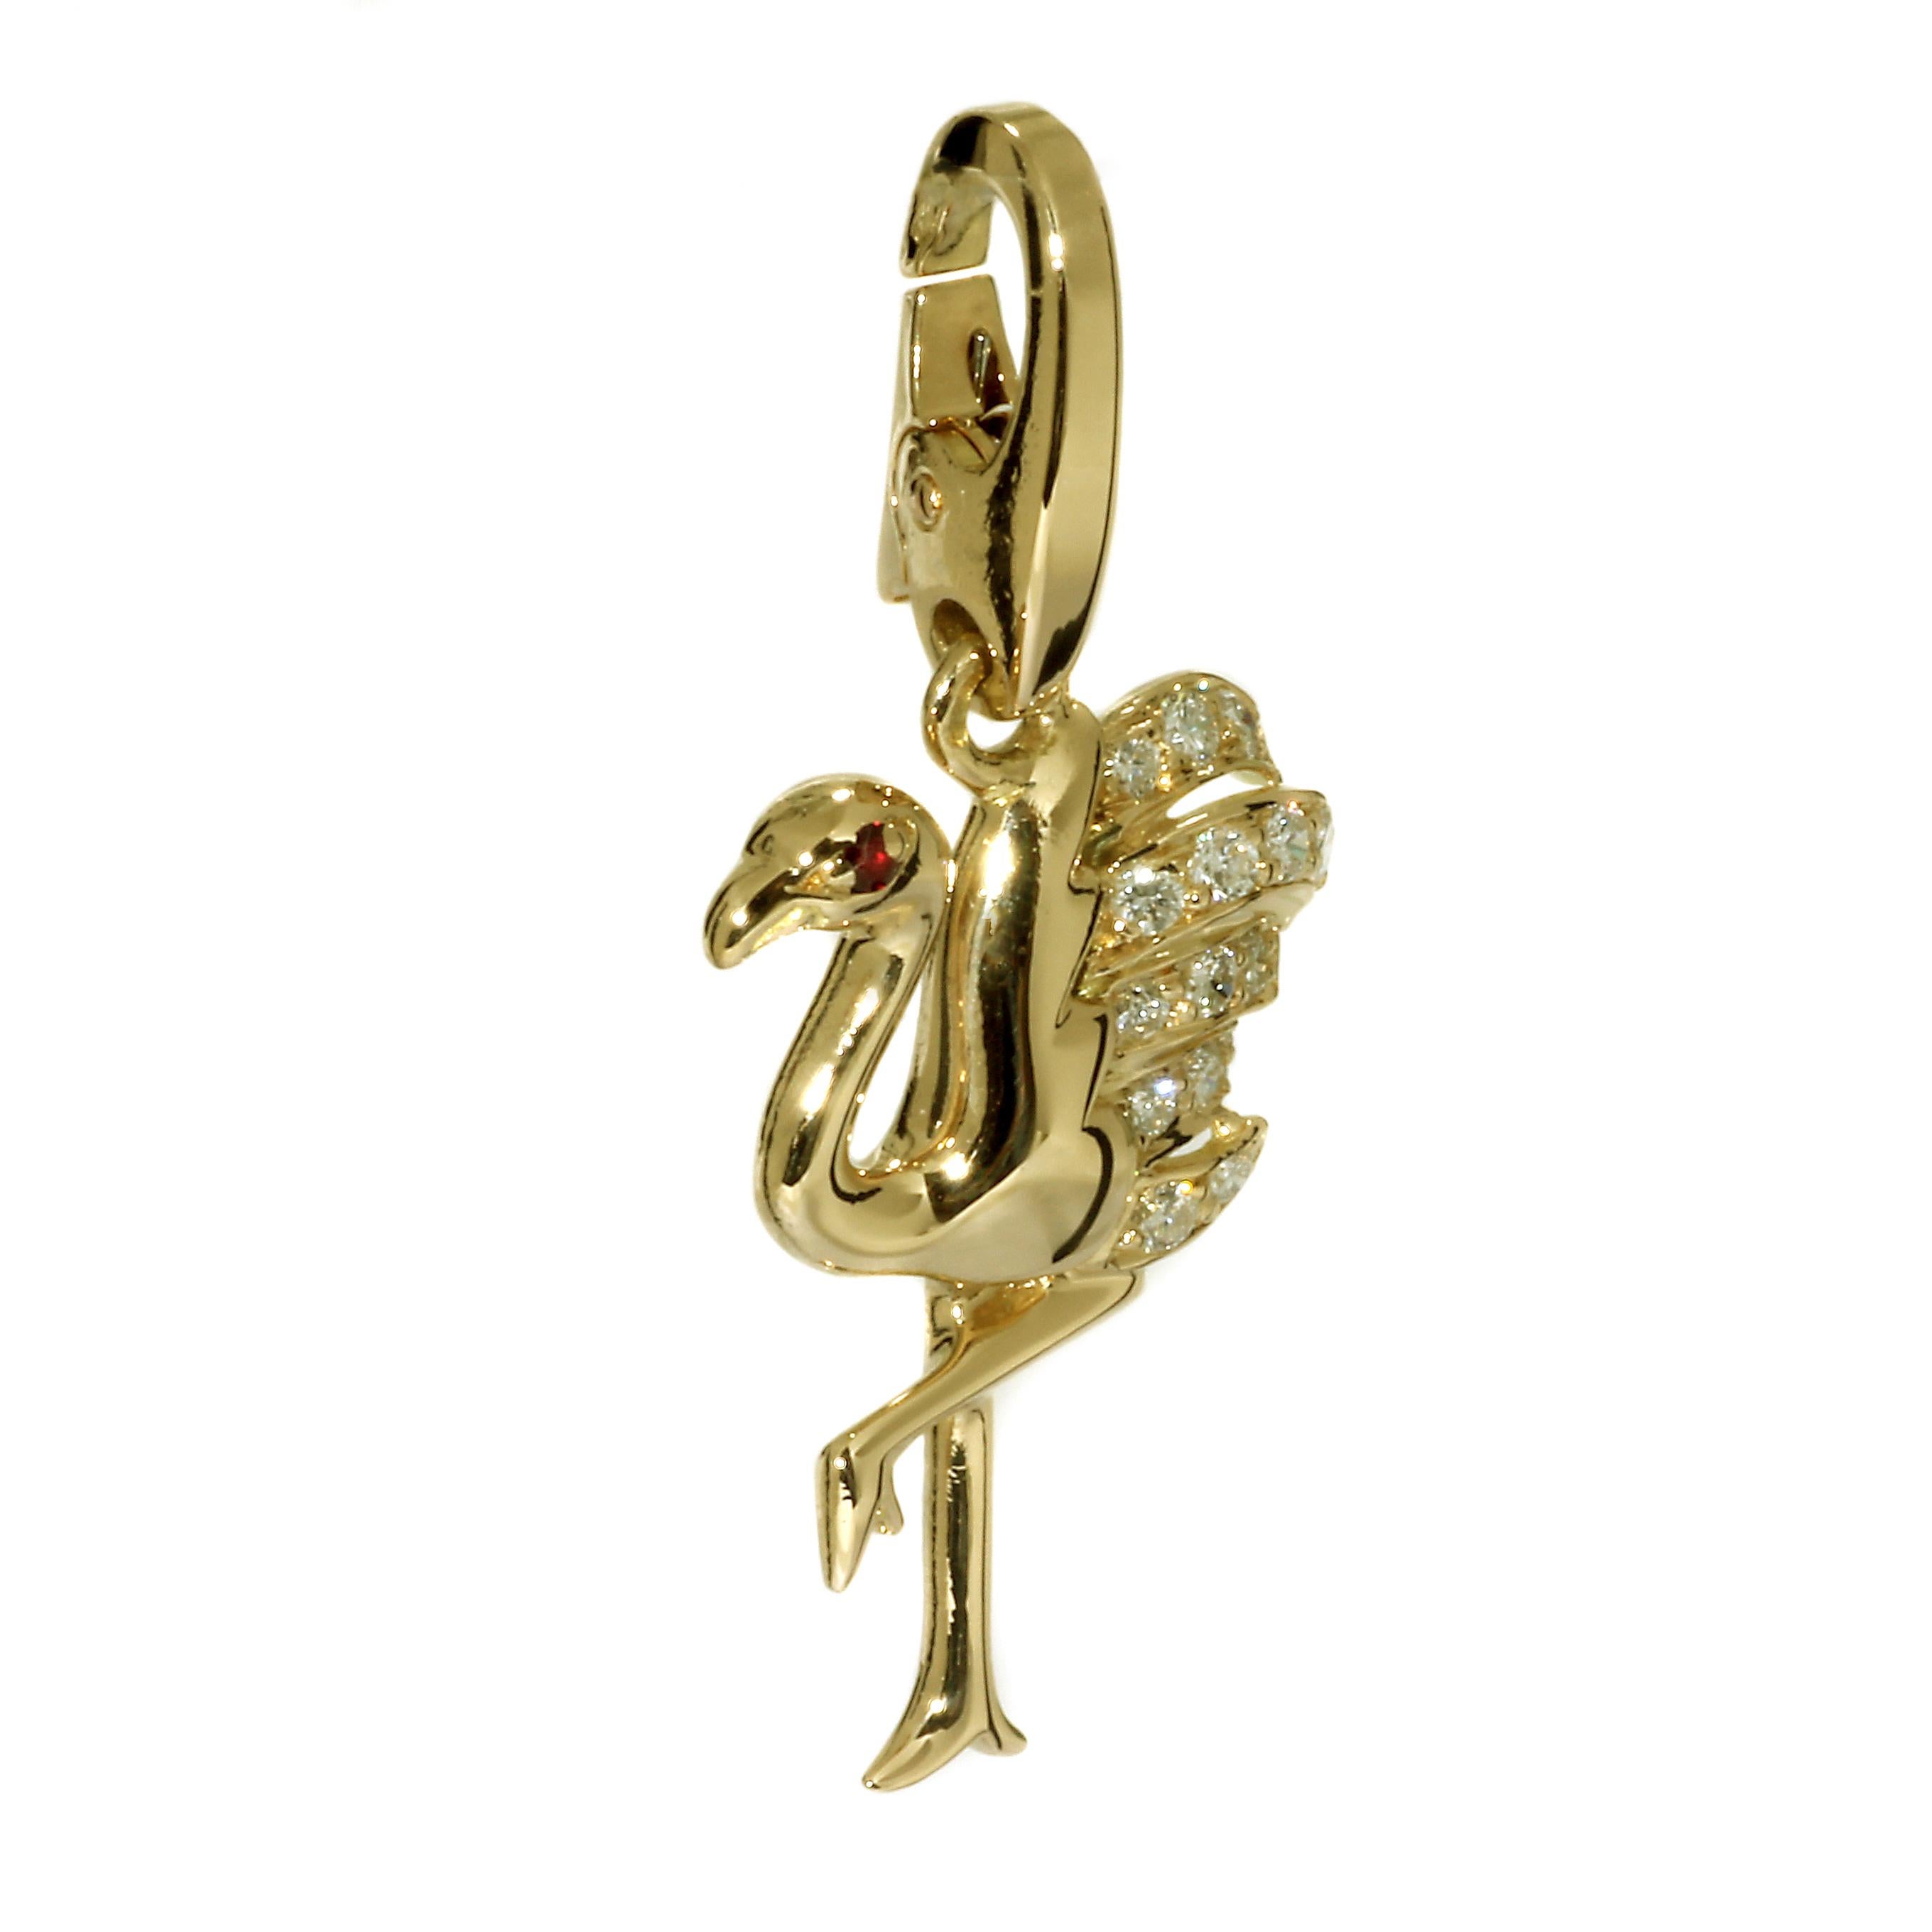 An extremely rare Cartier Flamingo pendant/ charm charm set with the finest Cartier round brilliant cut diamonds in 18k yellow gold.

Dimensions: 15mm wide (.59″ Inches) by 31mm (1.22″ Inches) in length

Inventory ID: 0000148